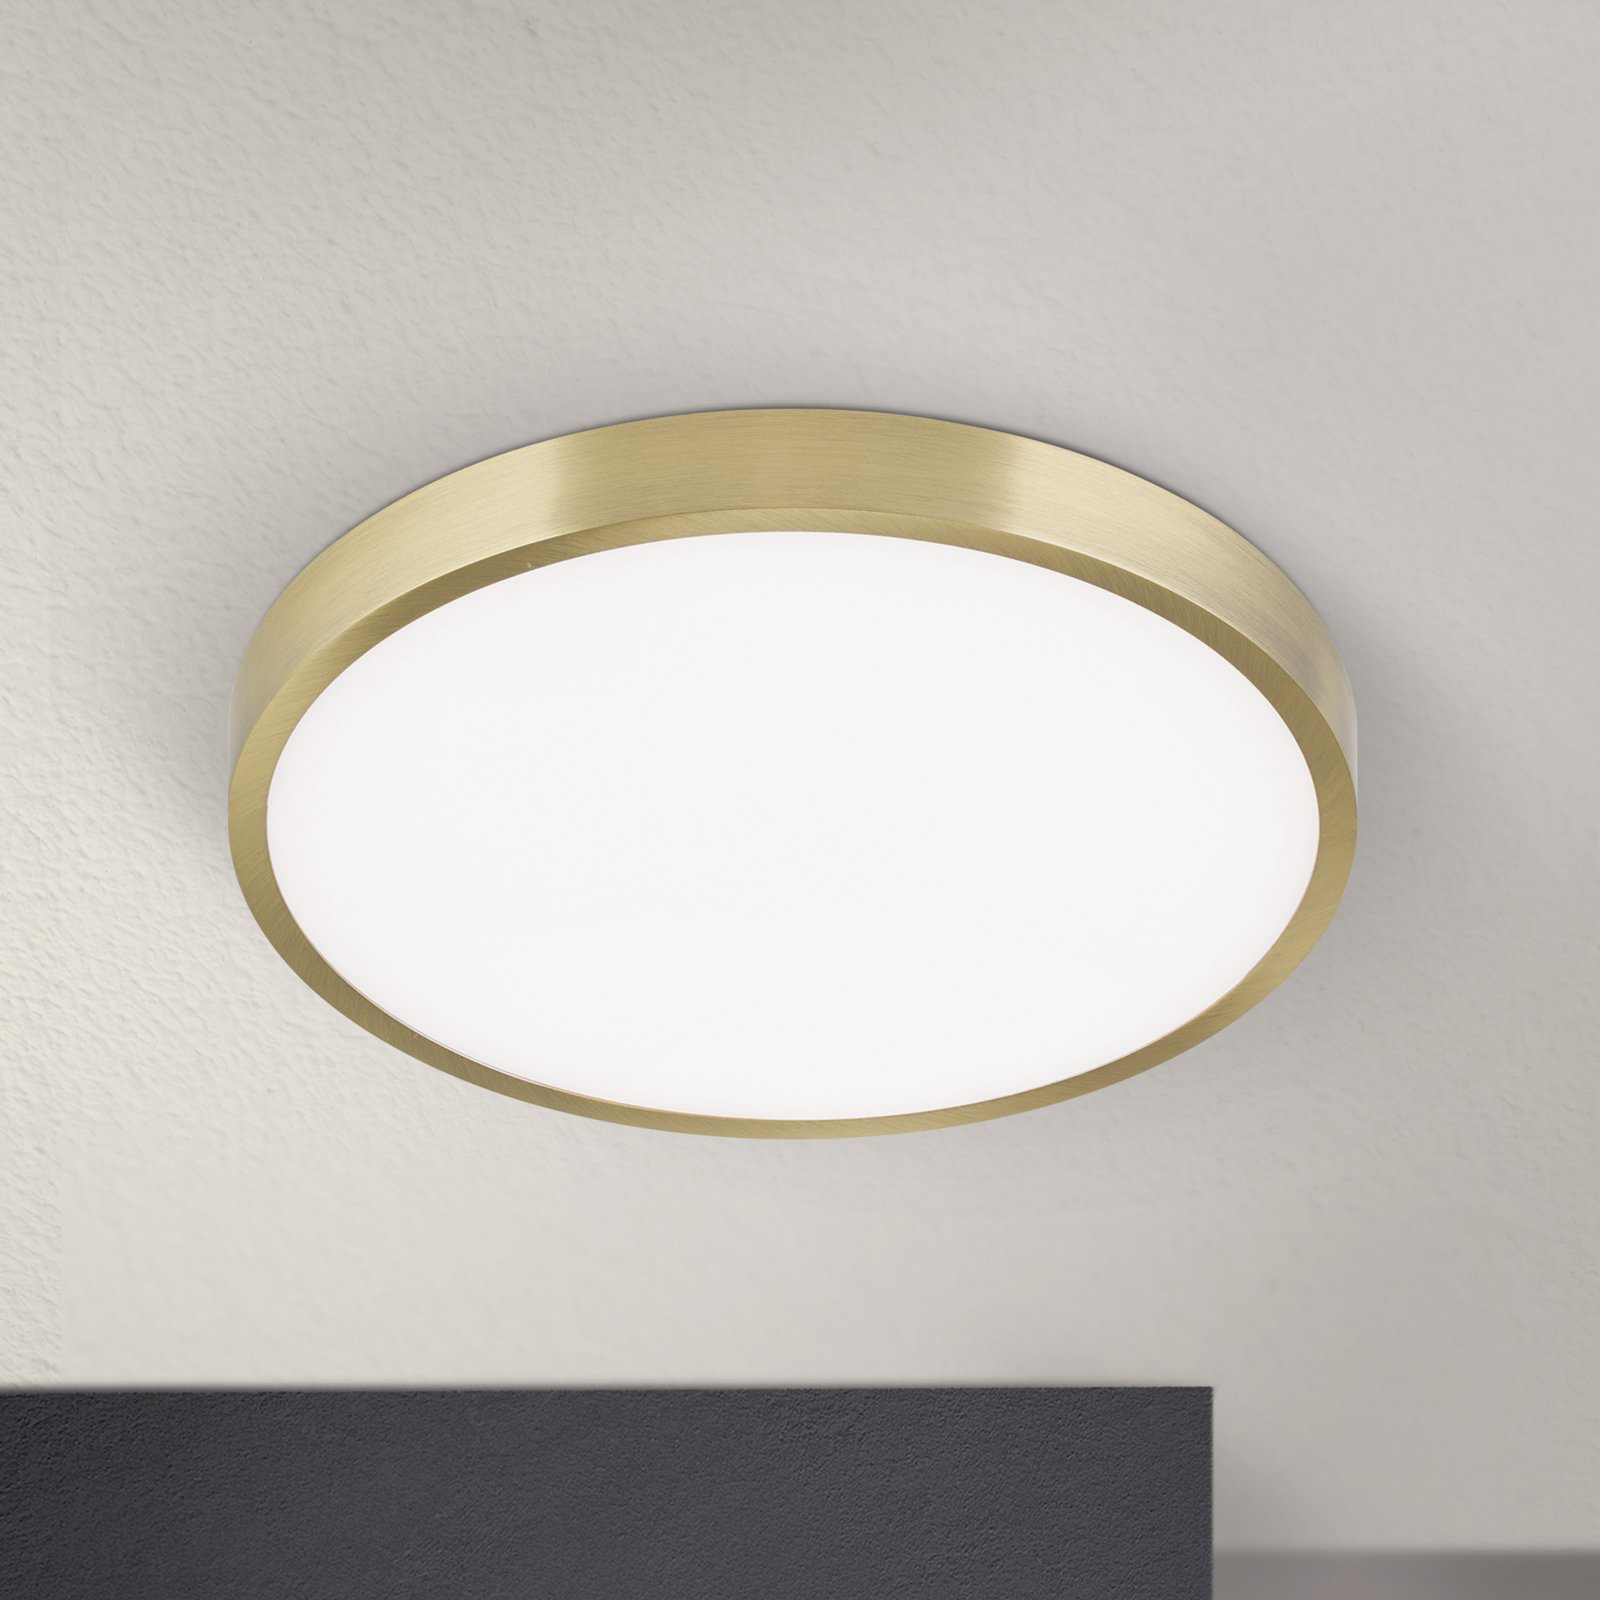 Bully LED ceiling light with patina look, Ø 28 cm